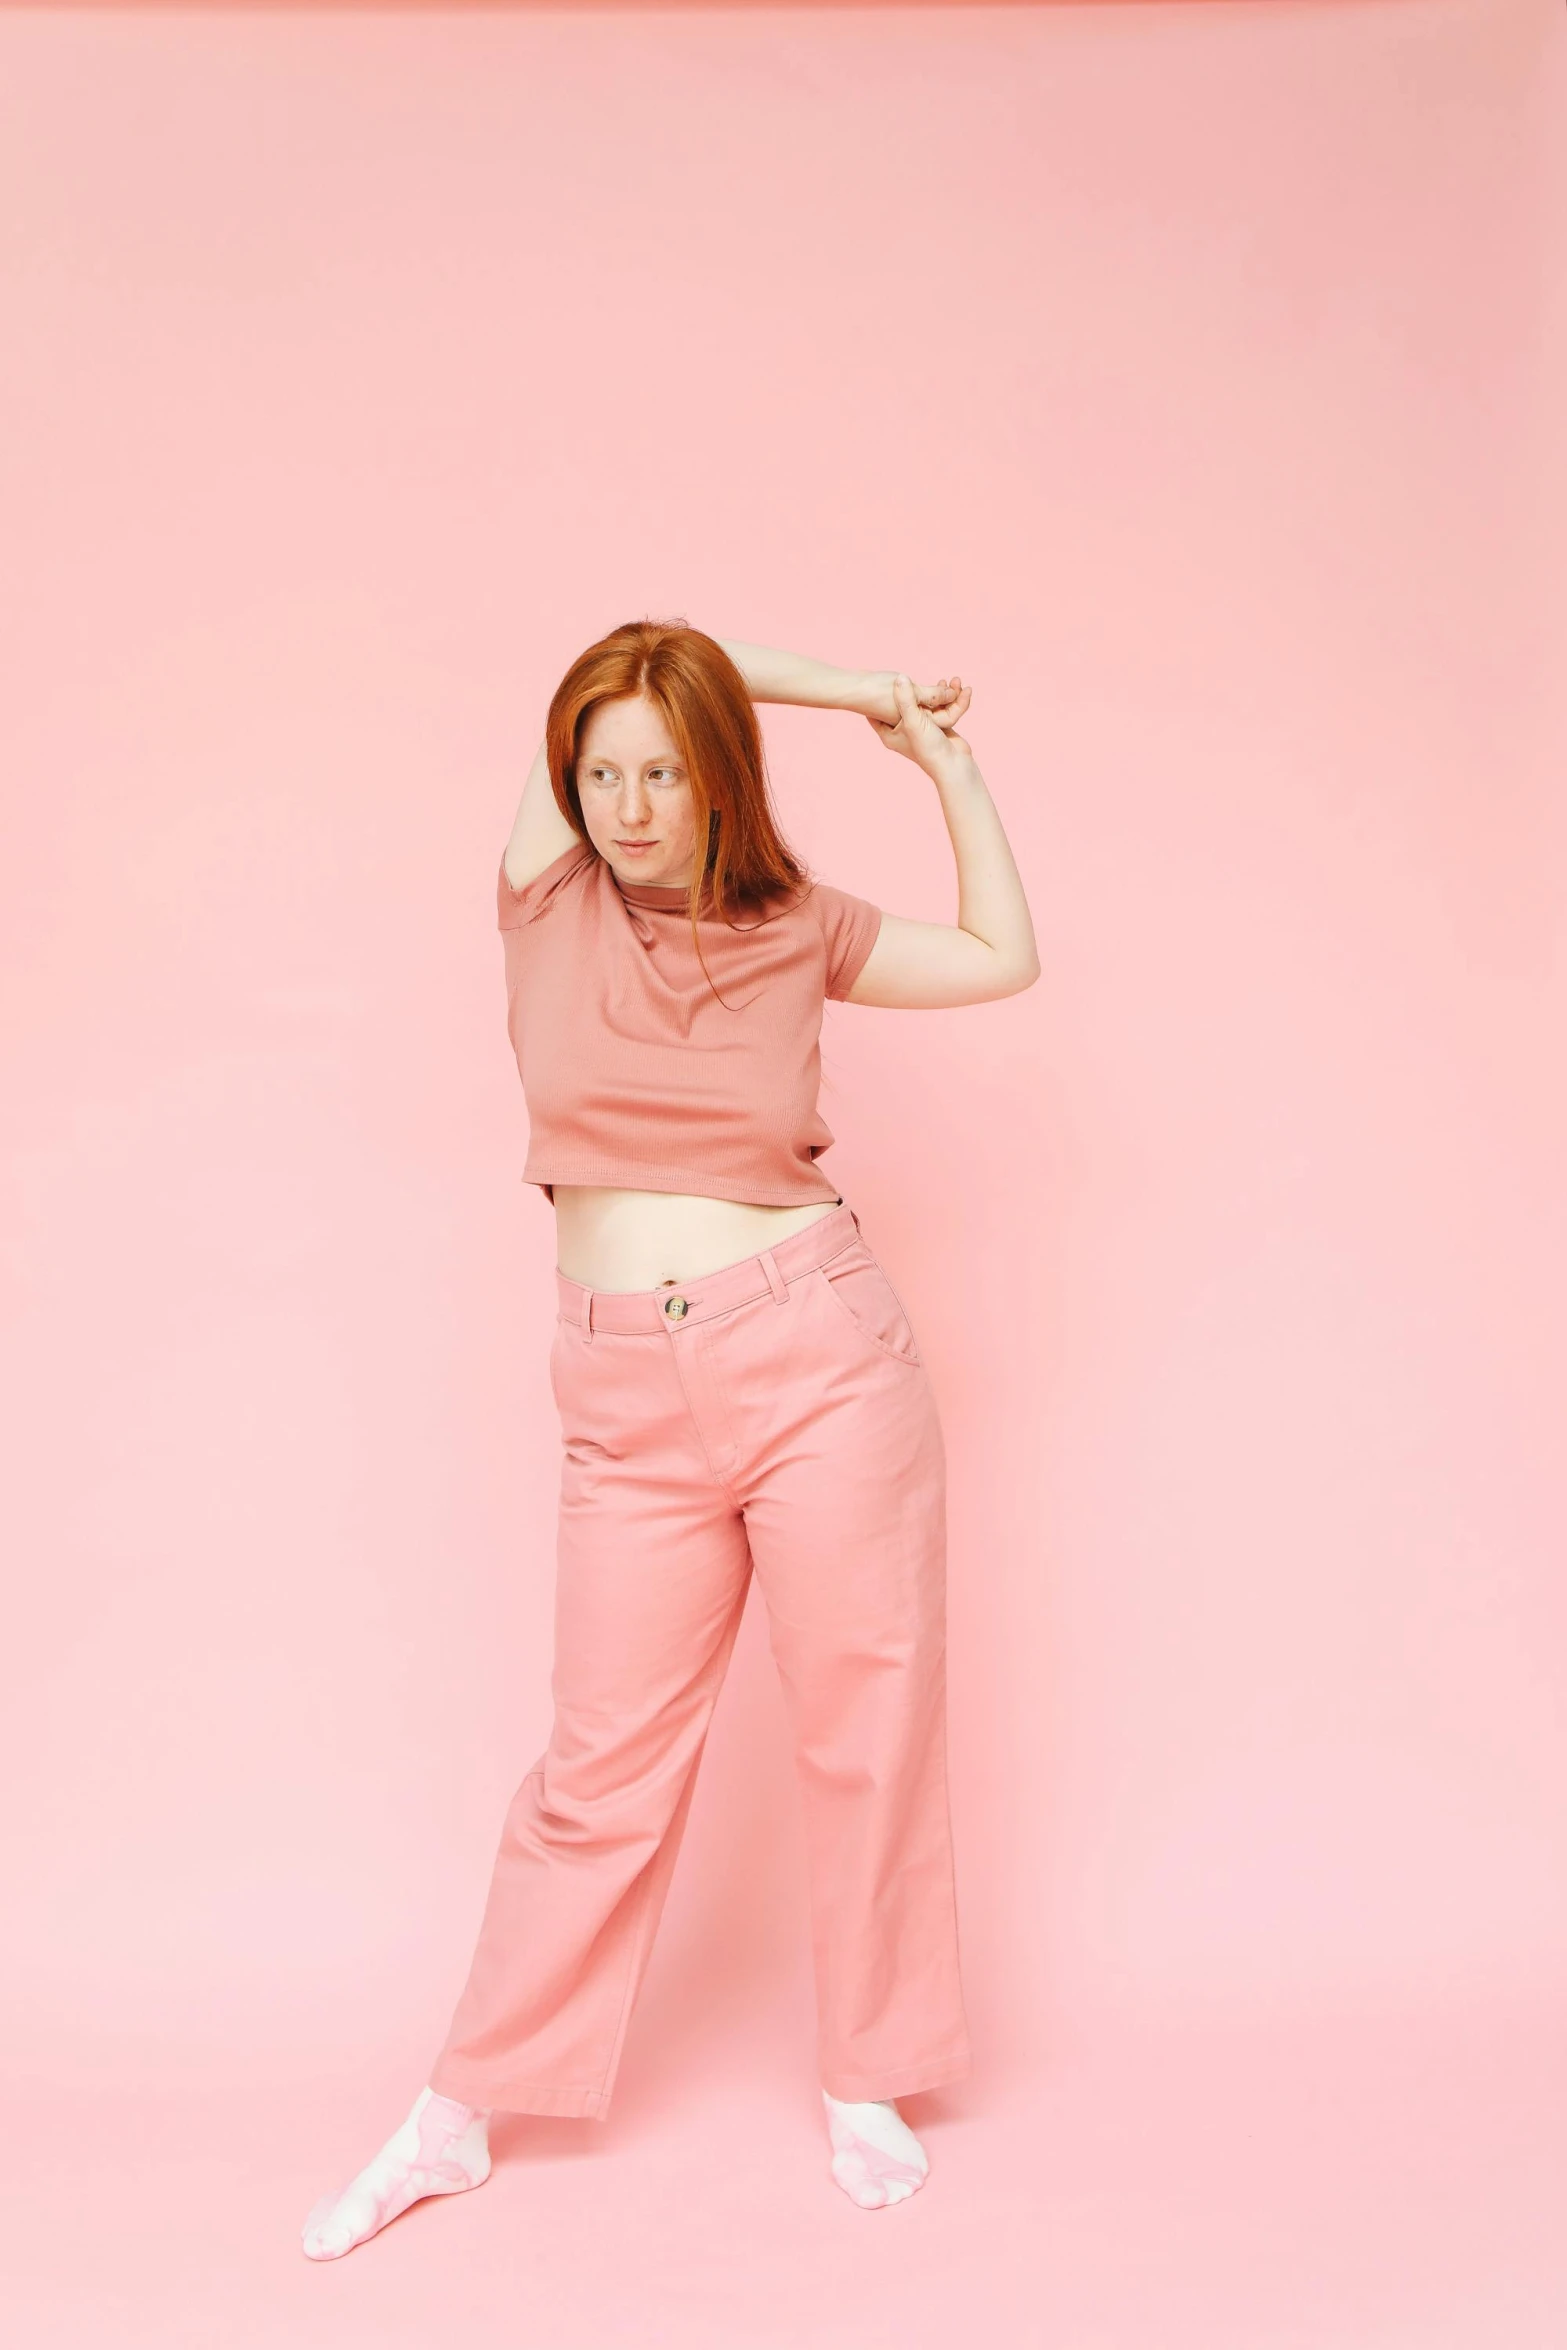 the woman with her hand on her head and in a pink top stands on a pink background